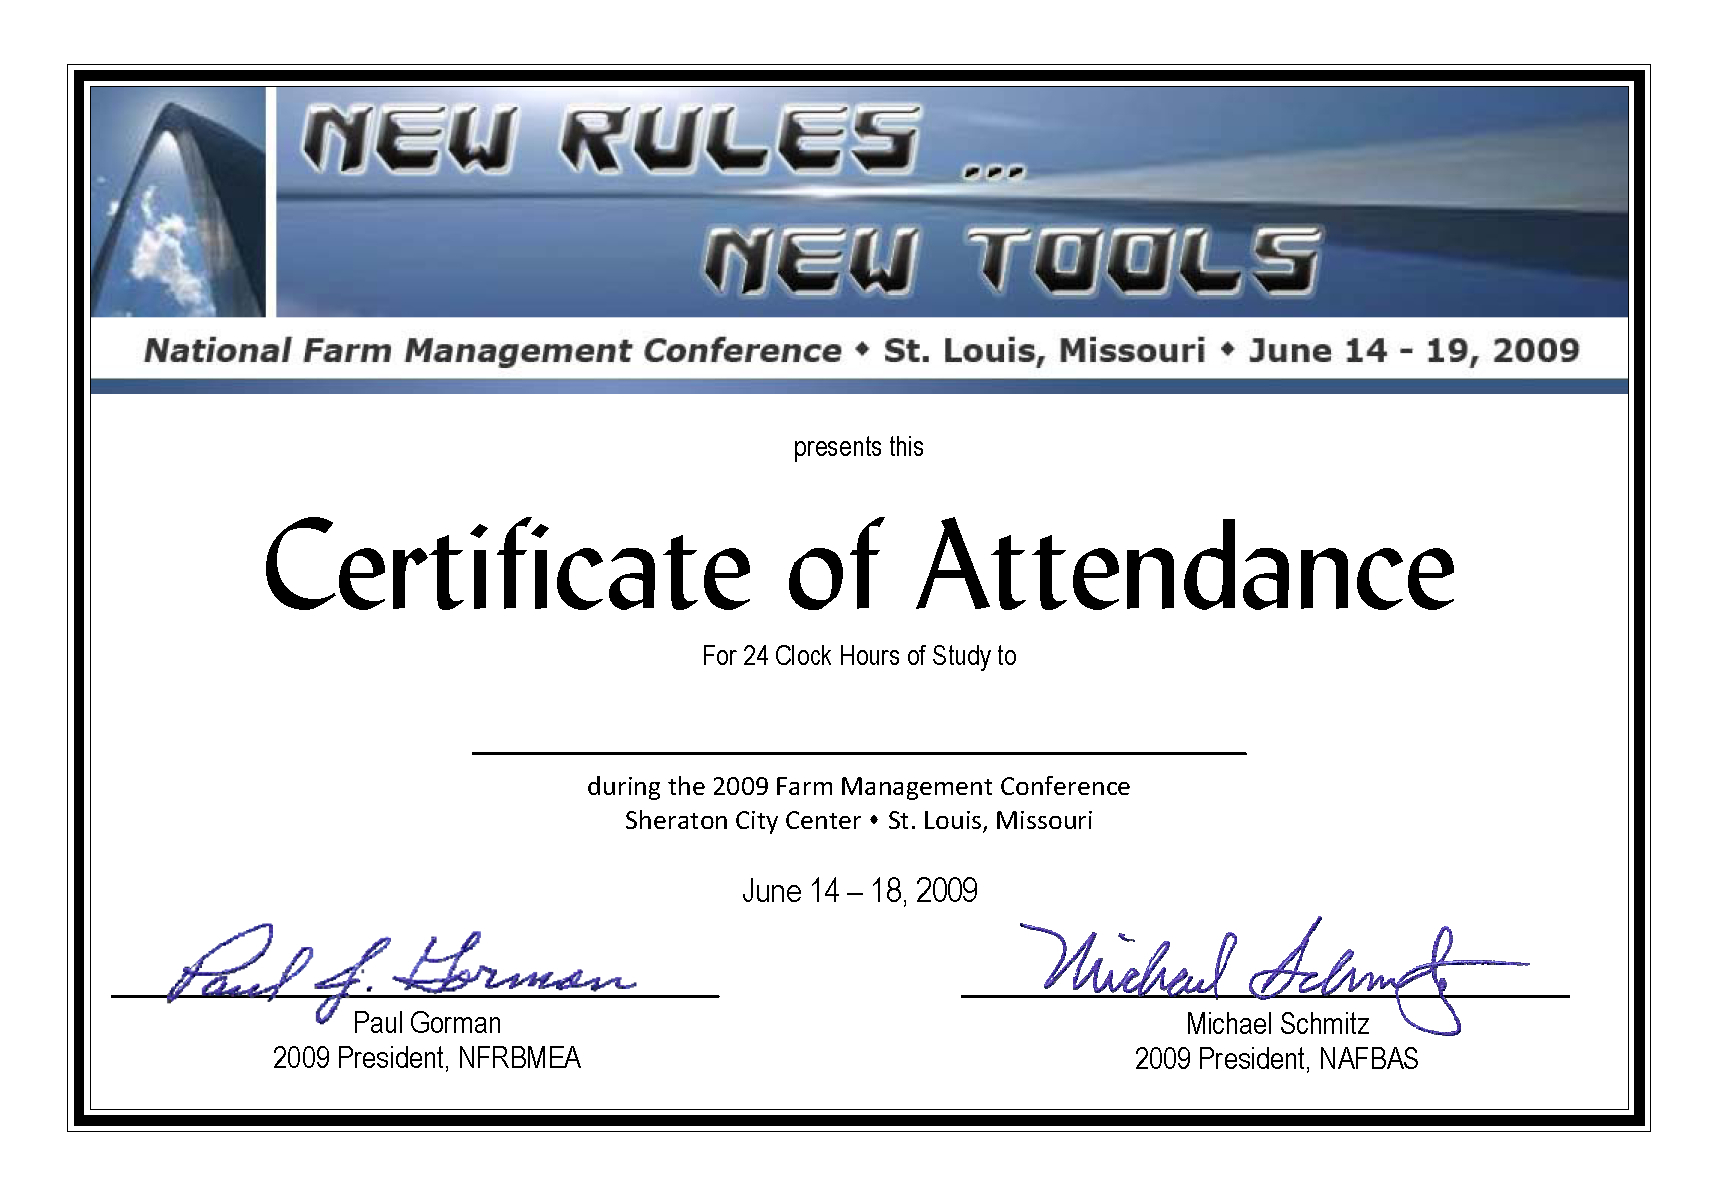 Conference Certificate Of Attendance Template - Great With Regard To Certificate Of Attendance Conference Template